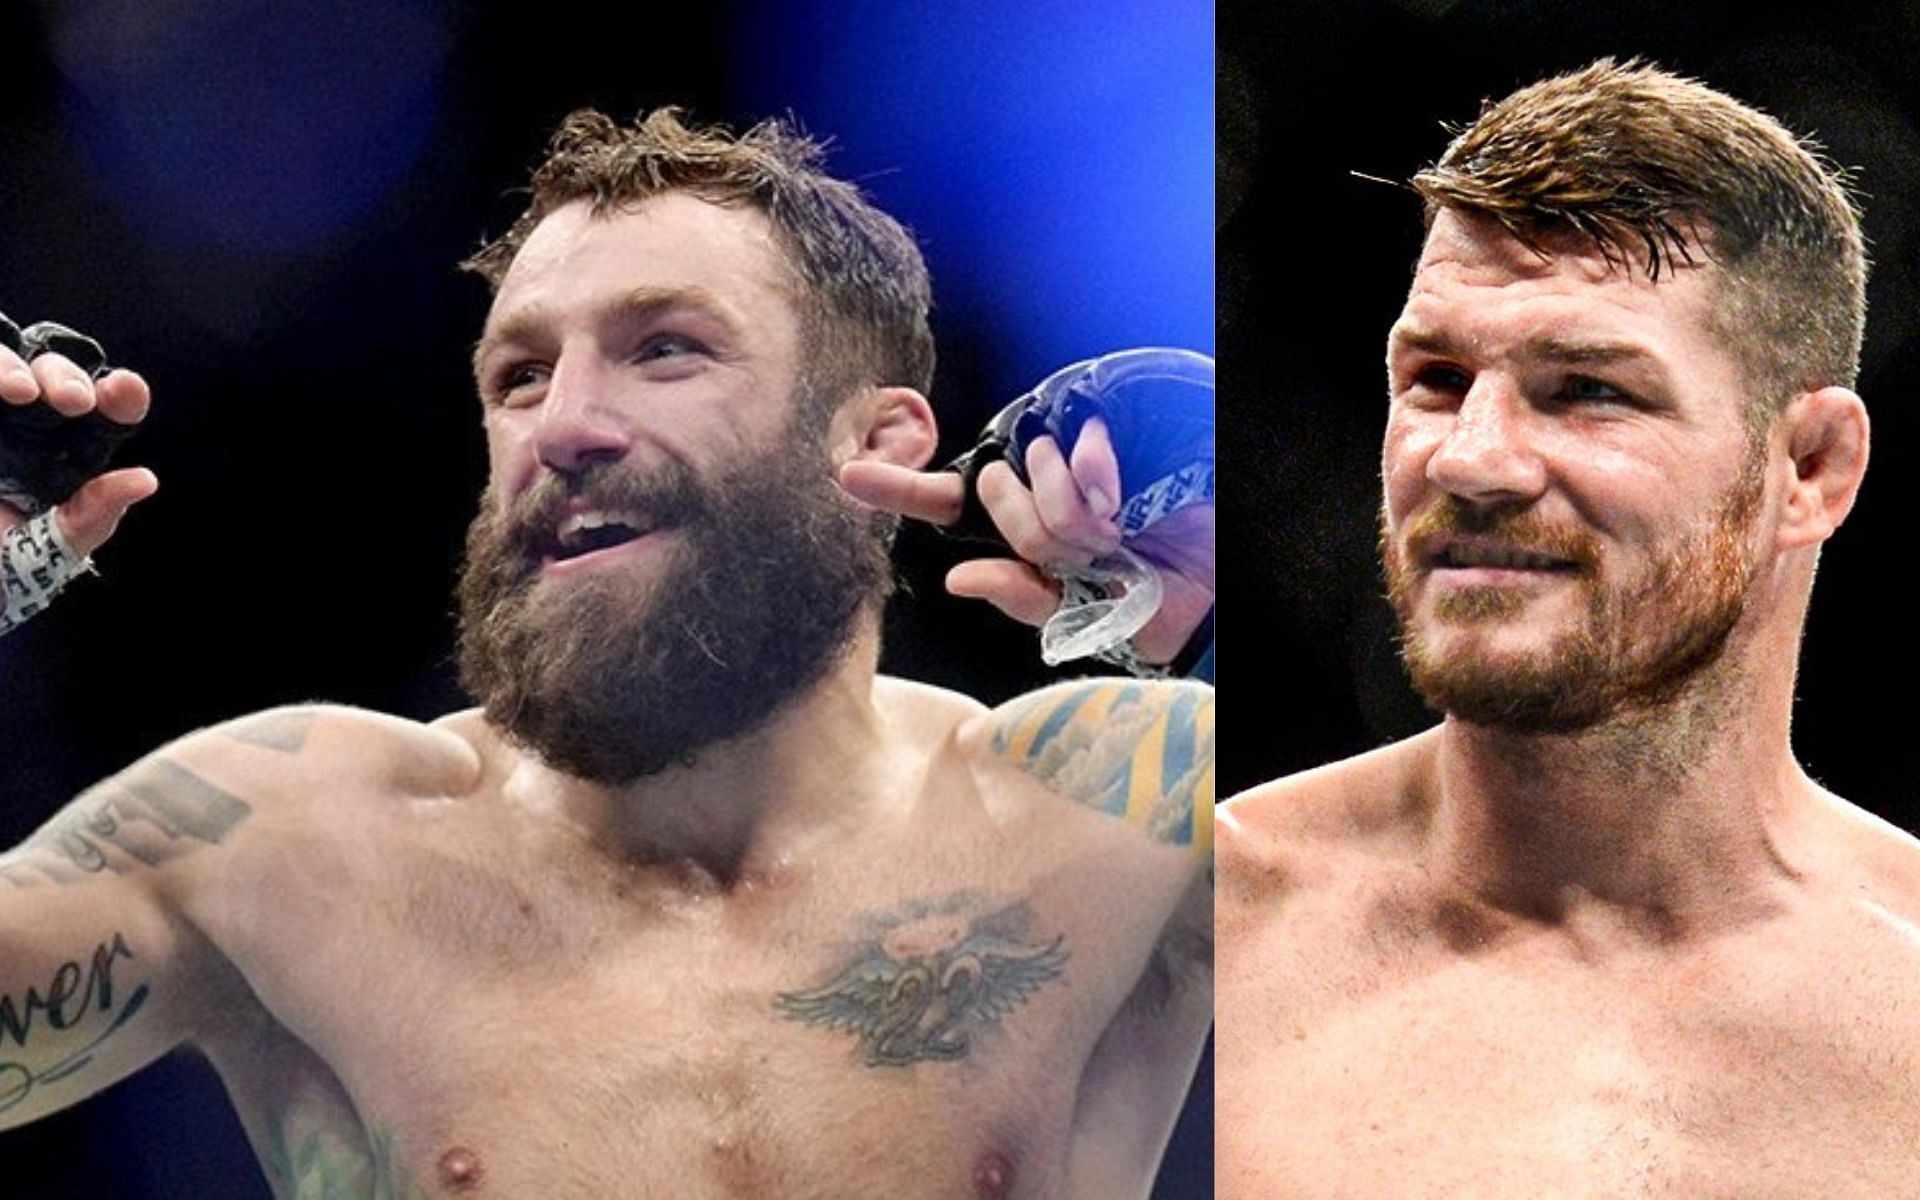 Michael Chiesa [Left] Michael Bisping [Right] [Images courtesy: @mma_kings and @LaSeuer_off (Twitter)]